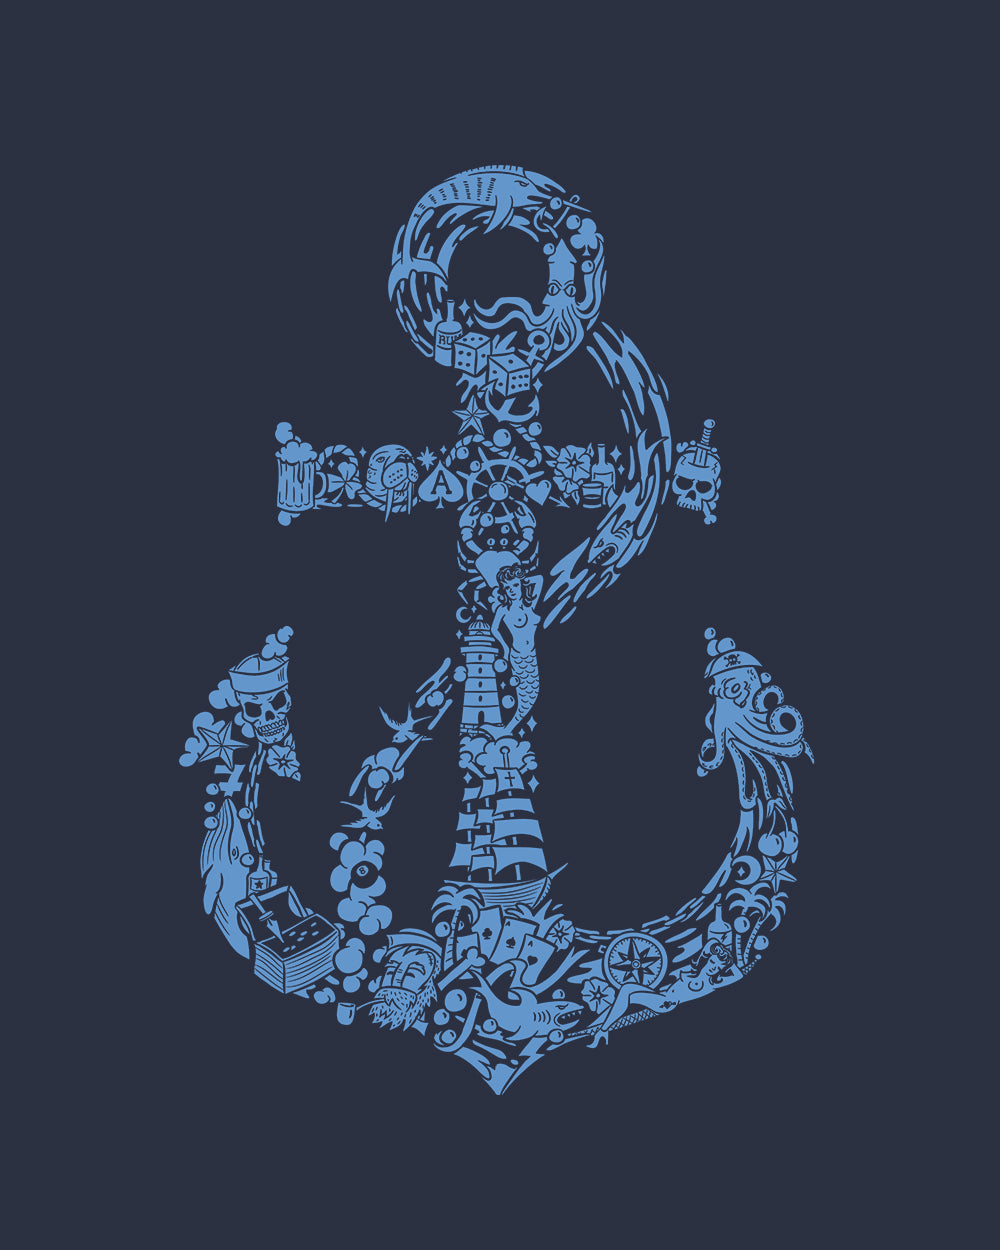 Tales from the Sea T-Shirt Australia Online #colour_navy